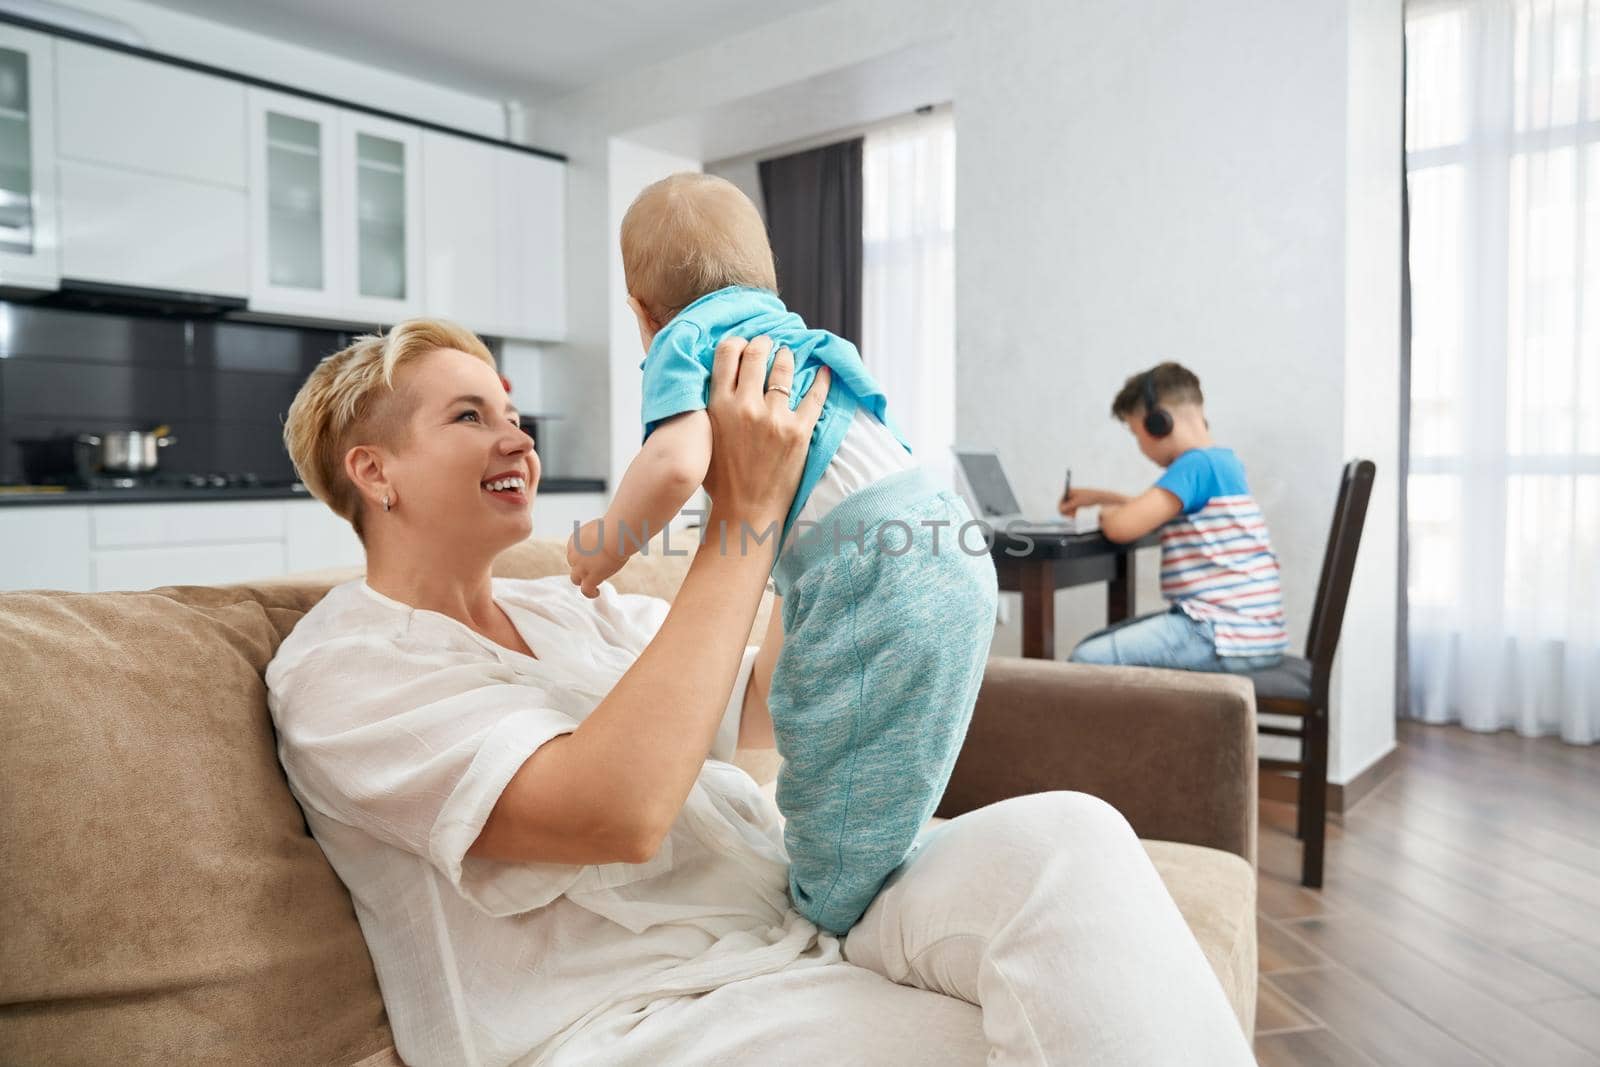 Smiling woman with short blond hair taking care of her little son while eldest son sitting at kitchen table and studying on laptop. Concept of family and technology.